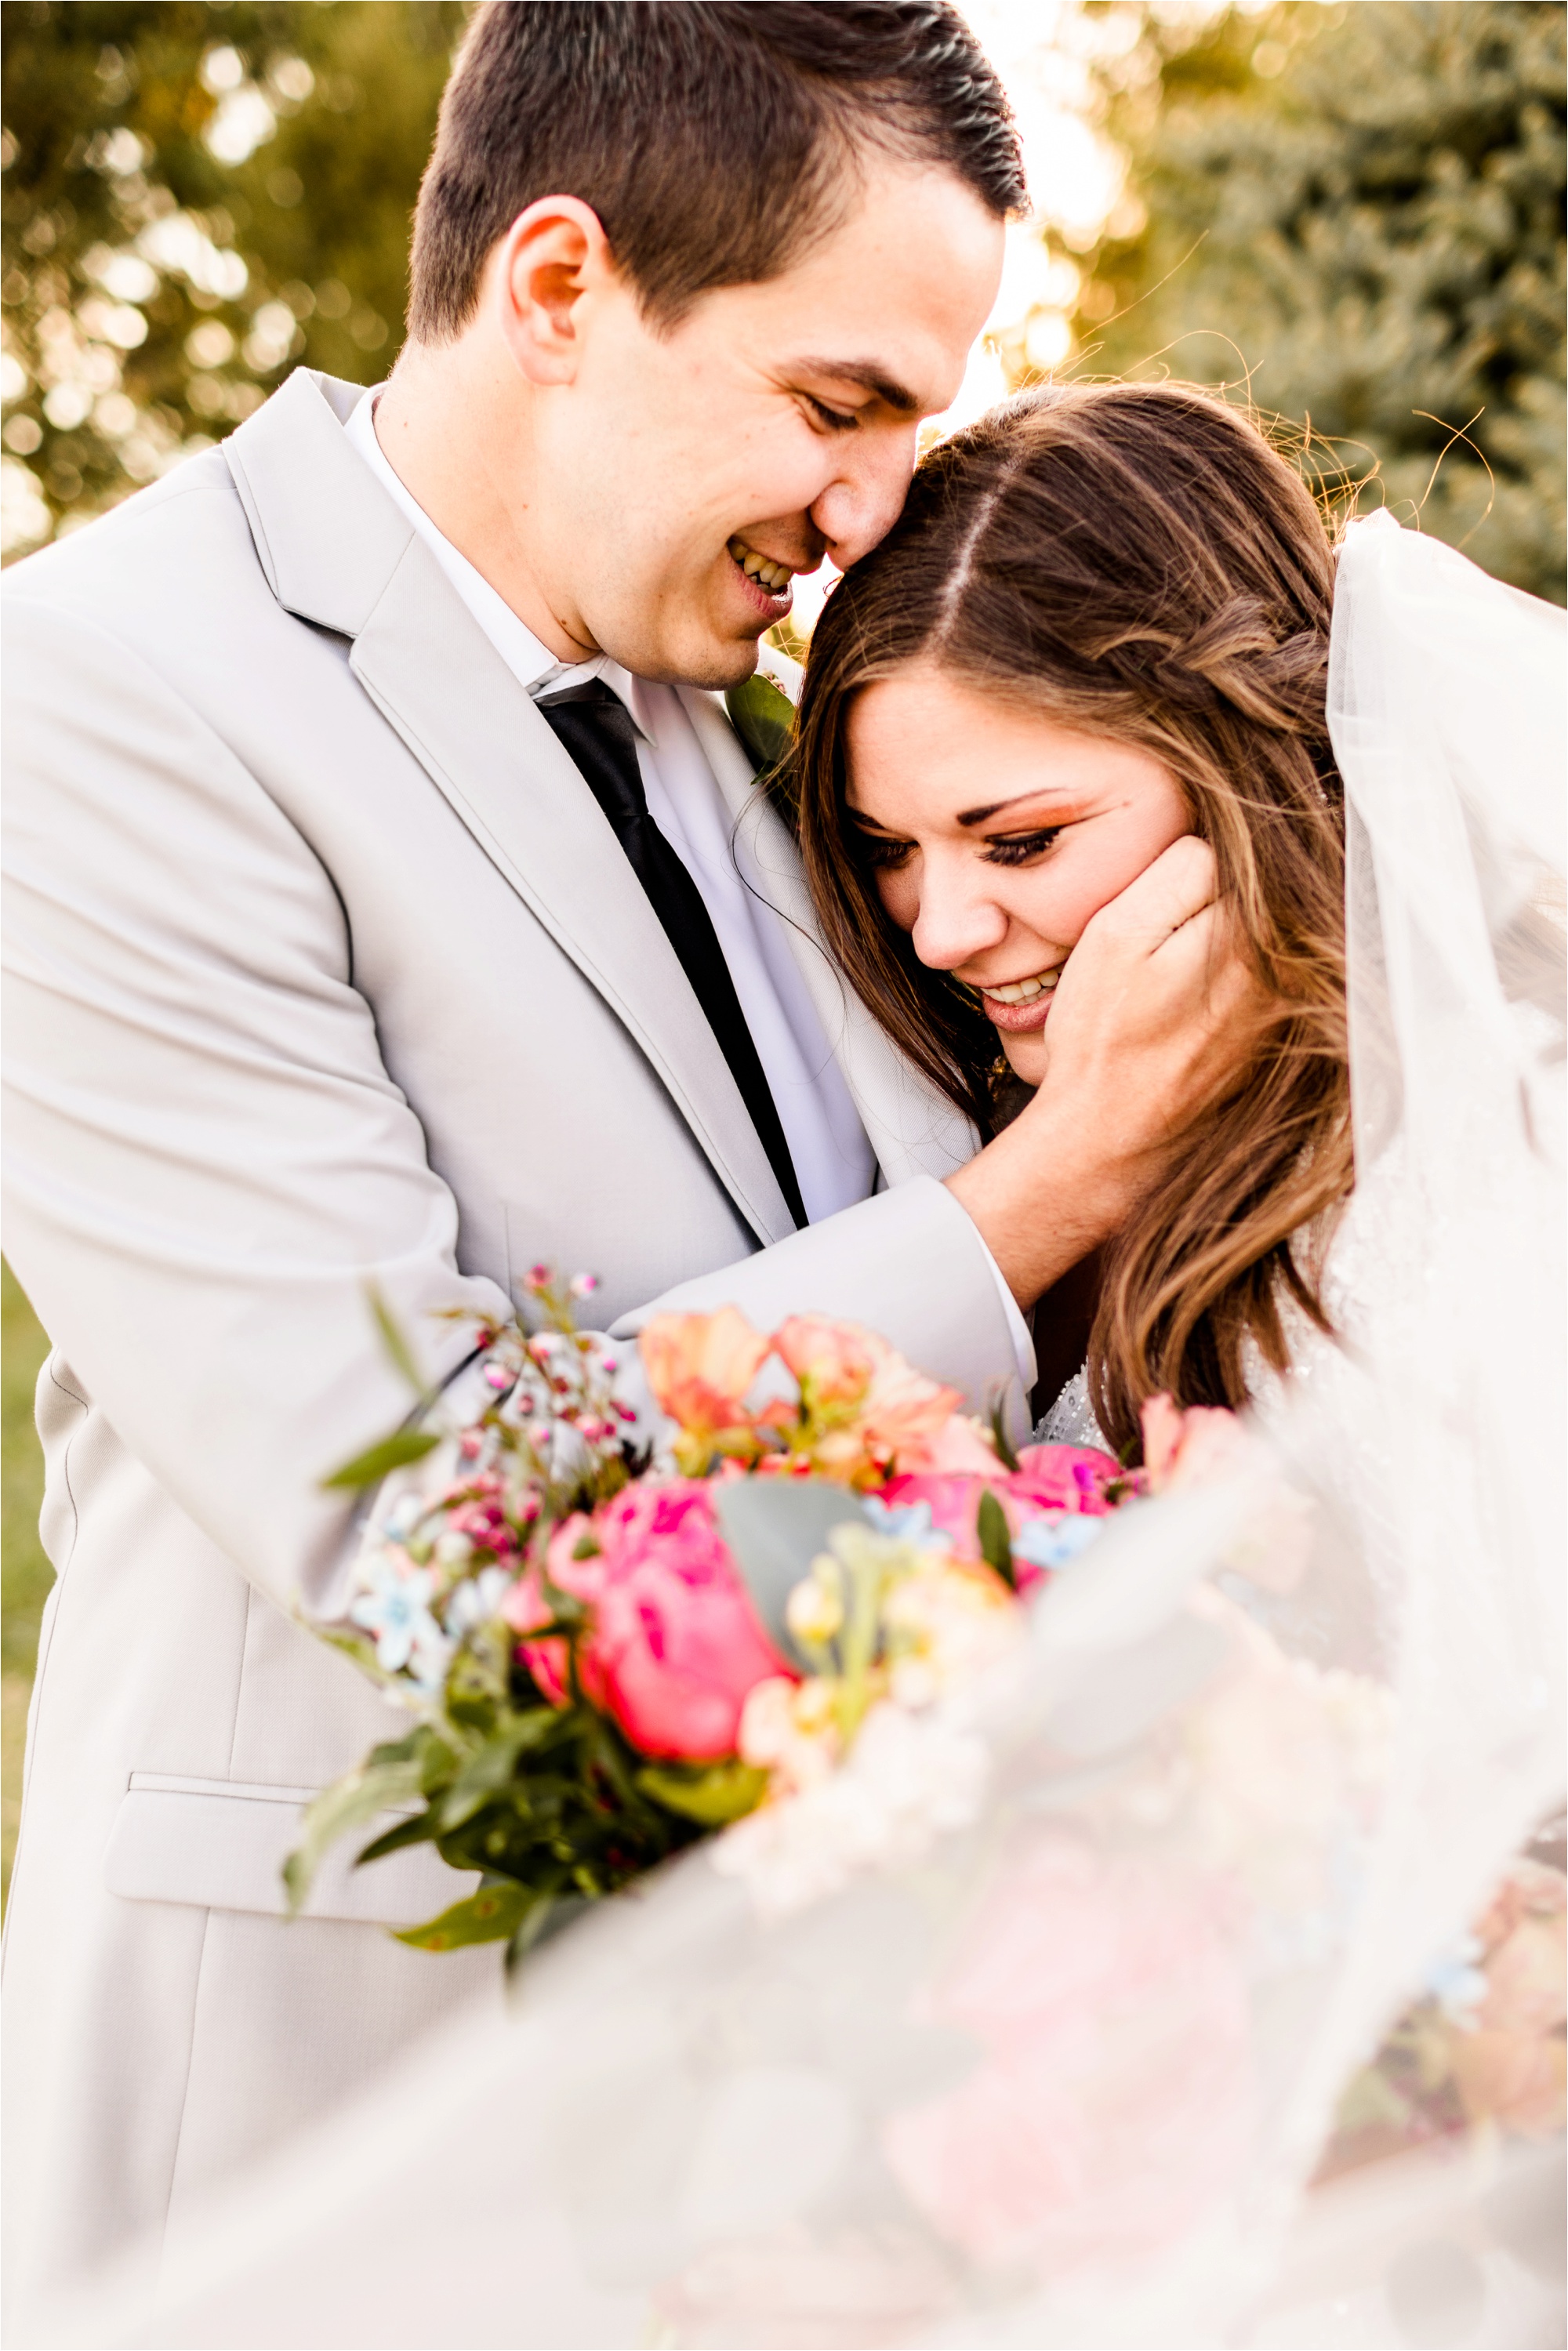 Caitlin and Luke Photography, Illinois Wedding Photographers, Champaign Wedding Photographers, Bloomington Normal Wedding Photographers, Romantic Red and Pink Sunset Styled Shoot_9574.jpg